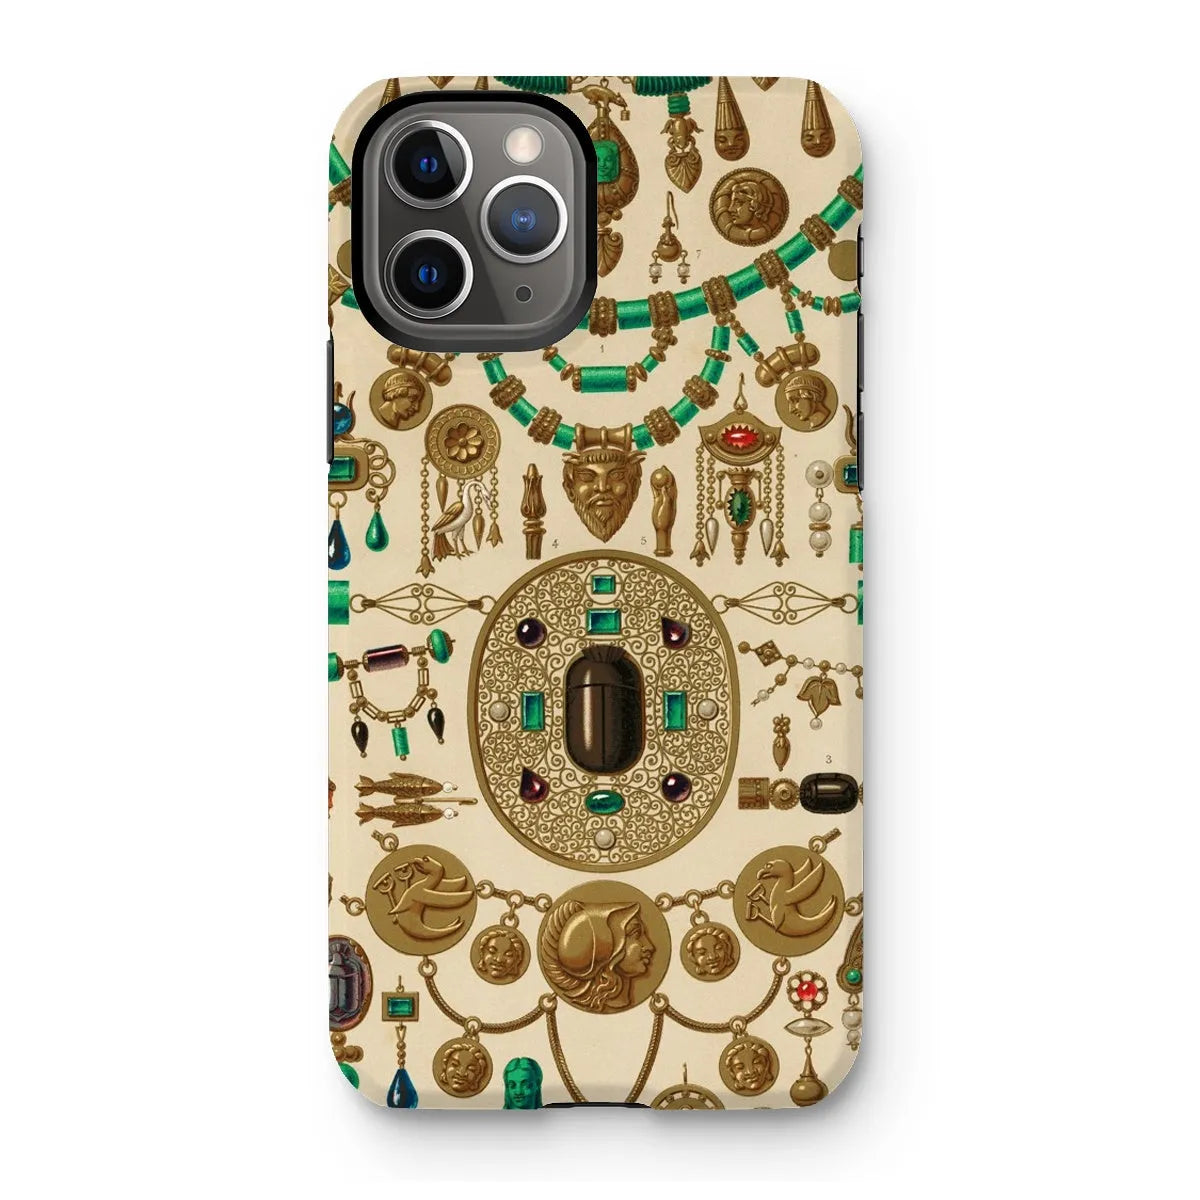 Etruscan Patterns From L’ornement Polychrome By Auguste Racinet Tough Phone Case - Iphone 11 Pro / Matte - Mobile